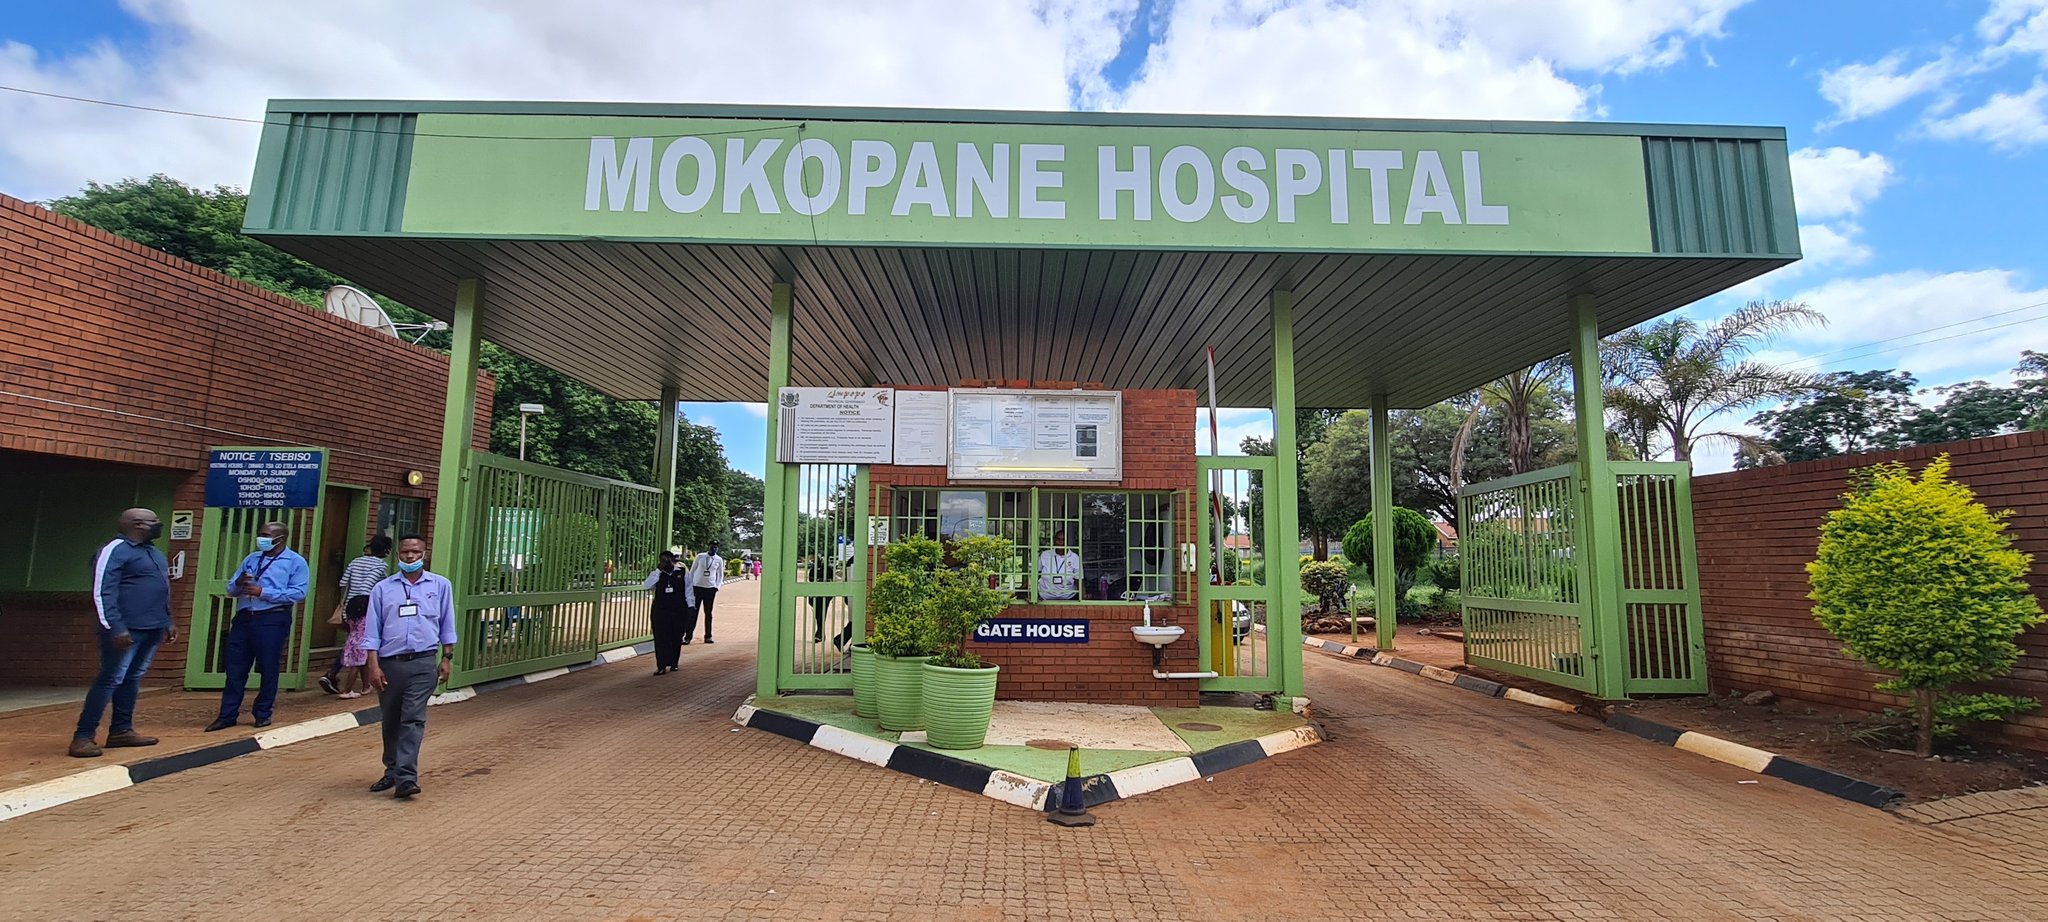 Mokopane Hospital partially temporarily closed due to windstorms